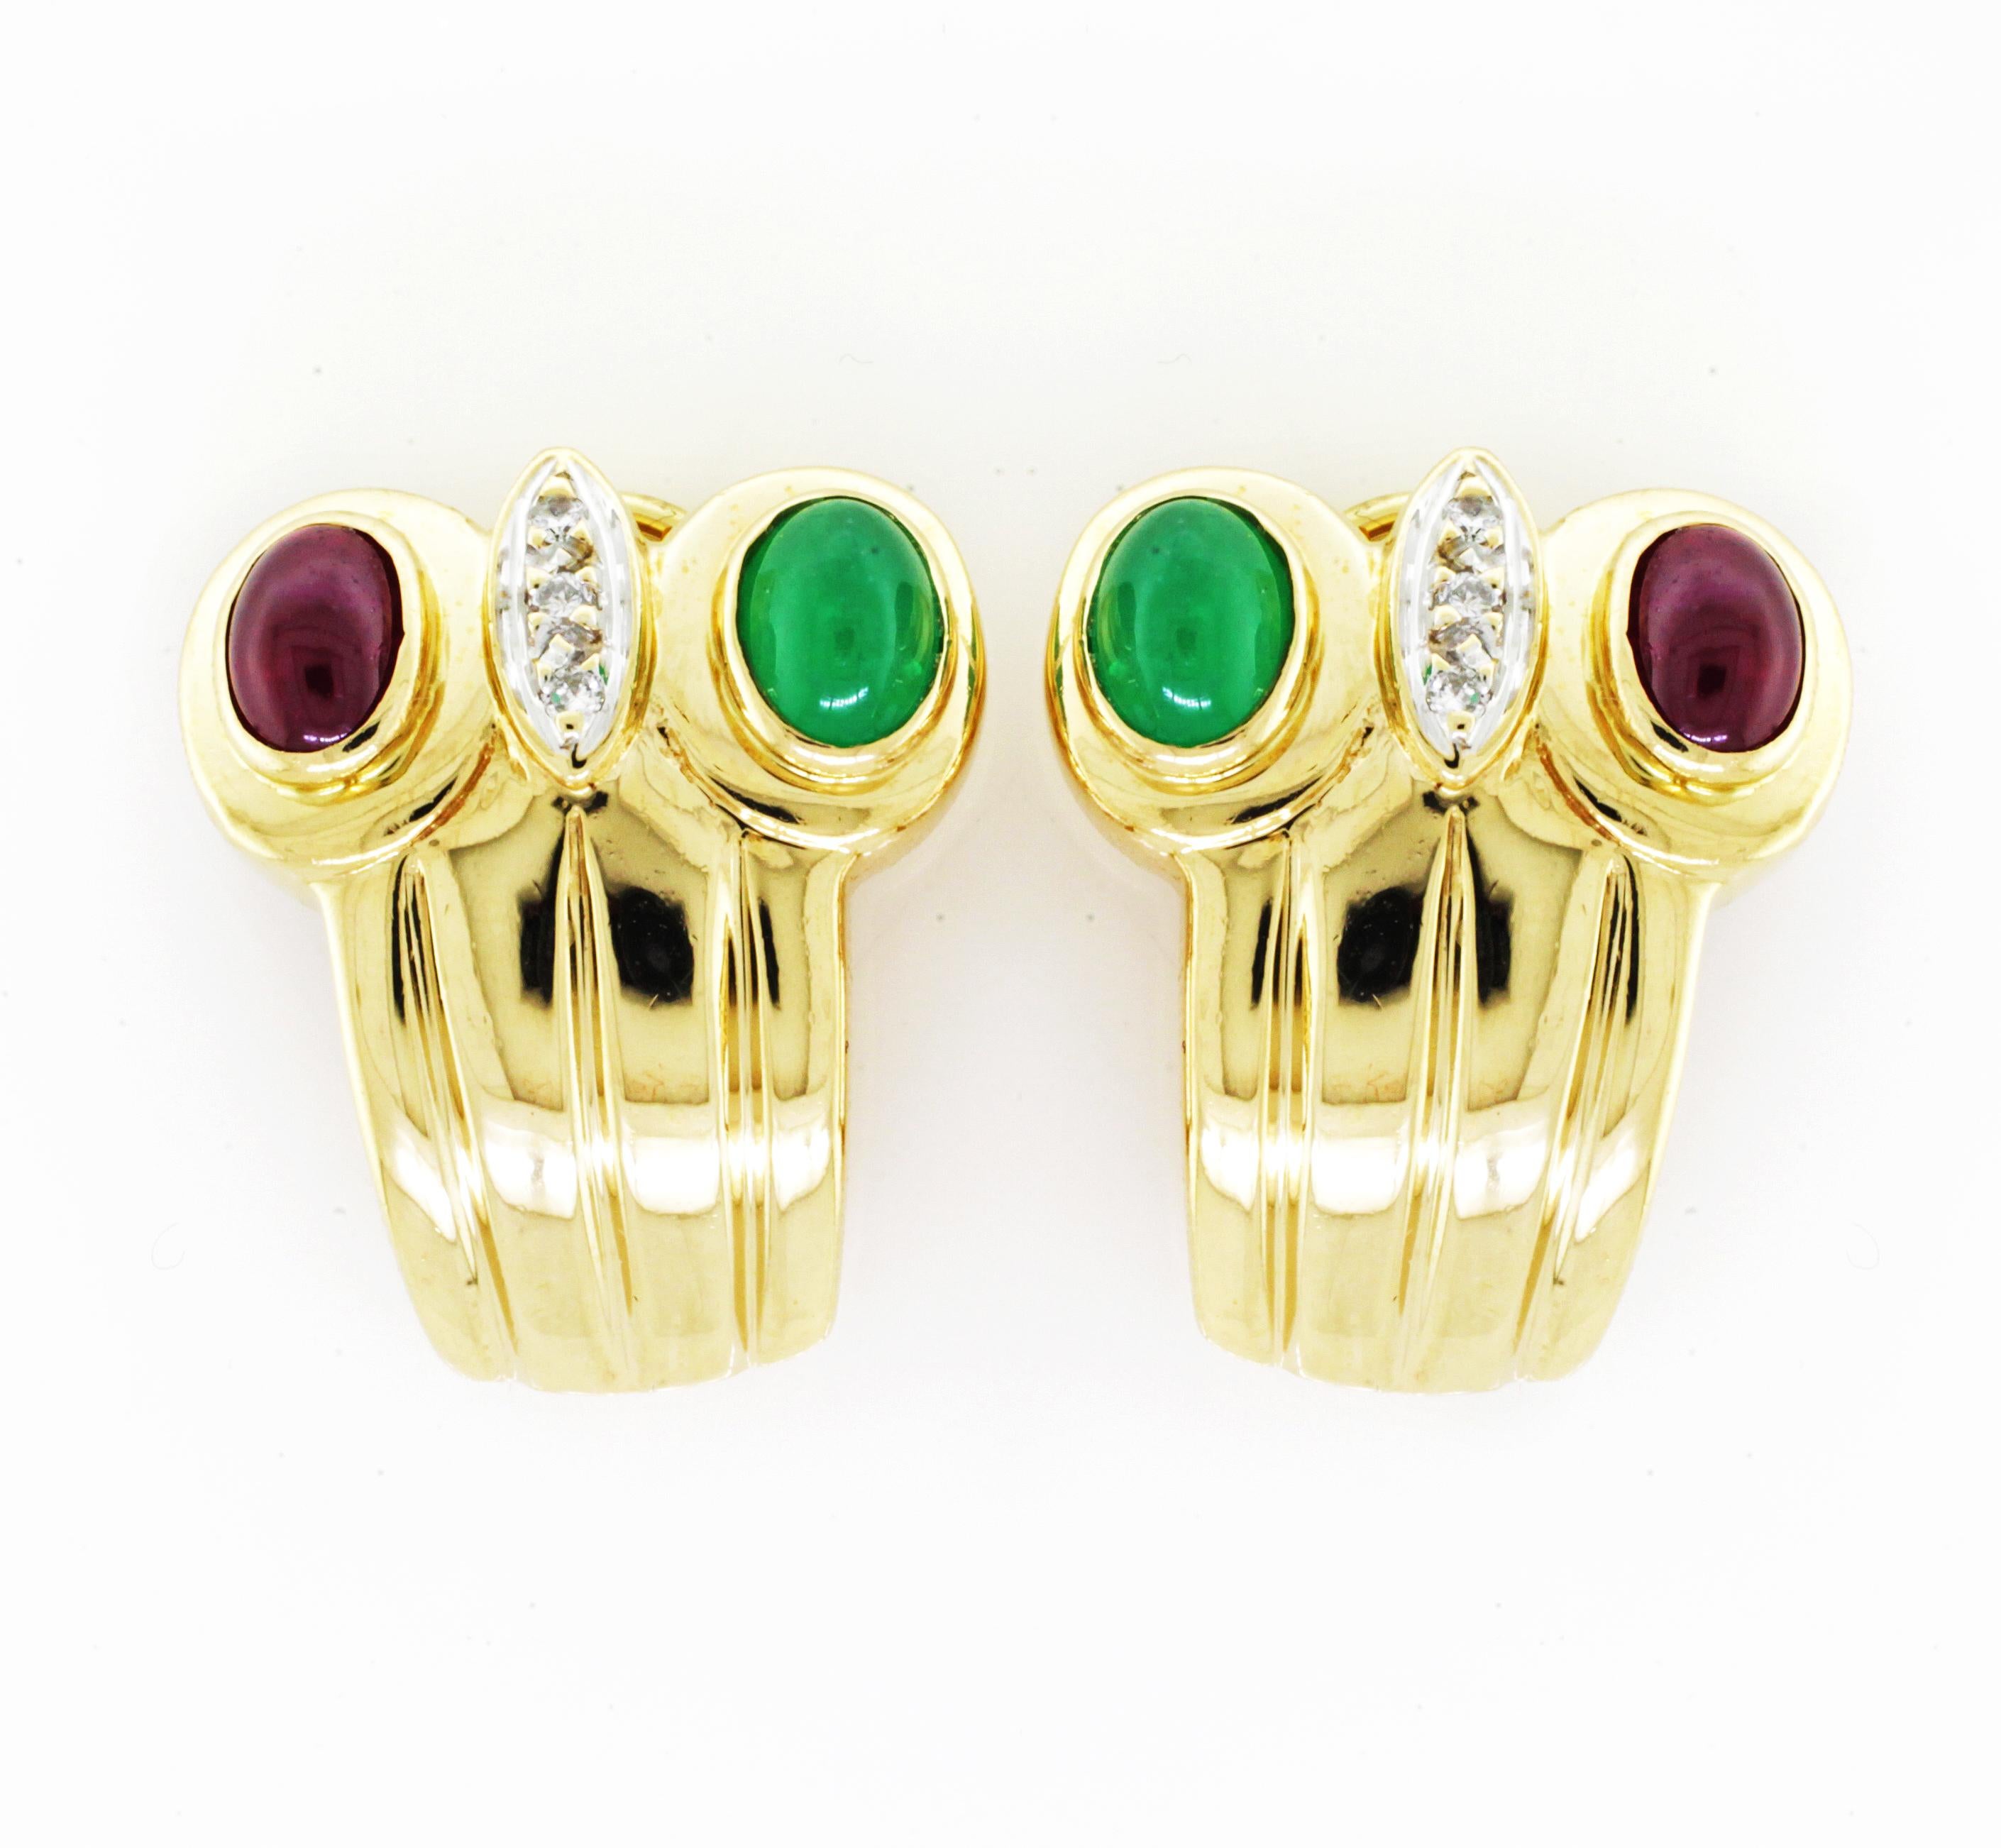 Yellow Gold Diamond Ruby Emerald Earclip Earrings 18 Karat Yellow Gold In Good Condition For Sale In New York, NY